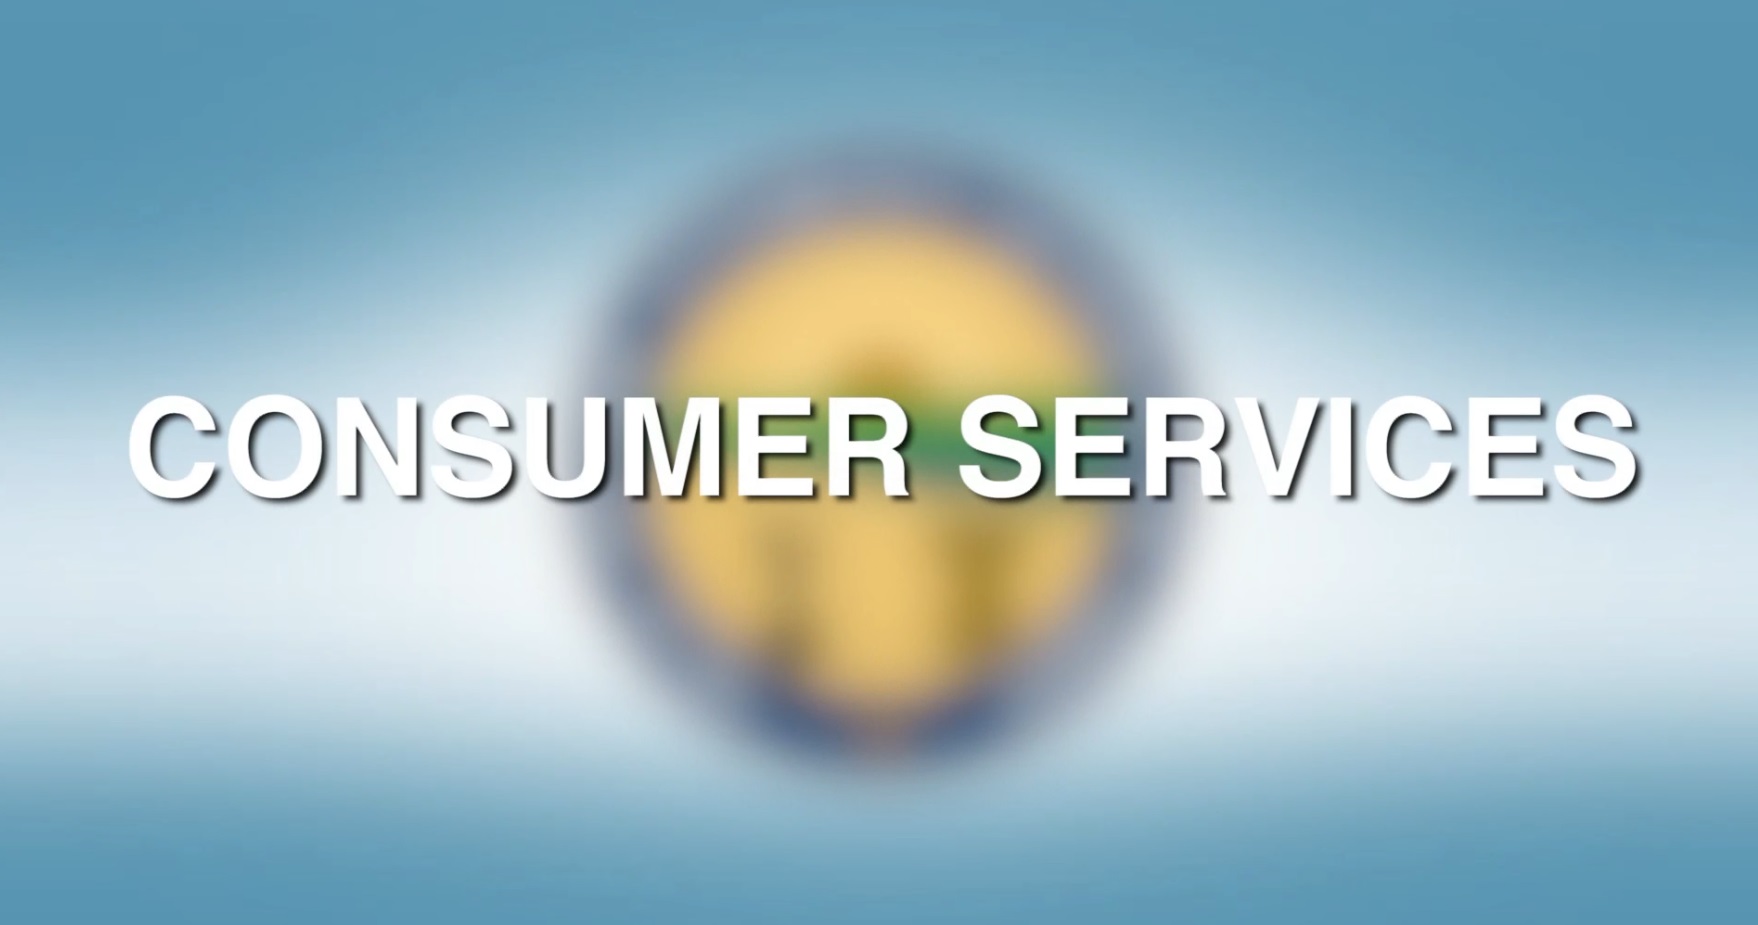 National Consumer Protection Week Video Tip: Consumer Services